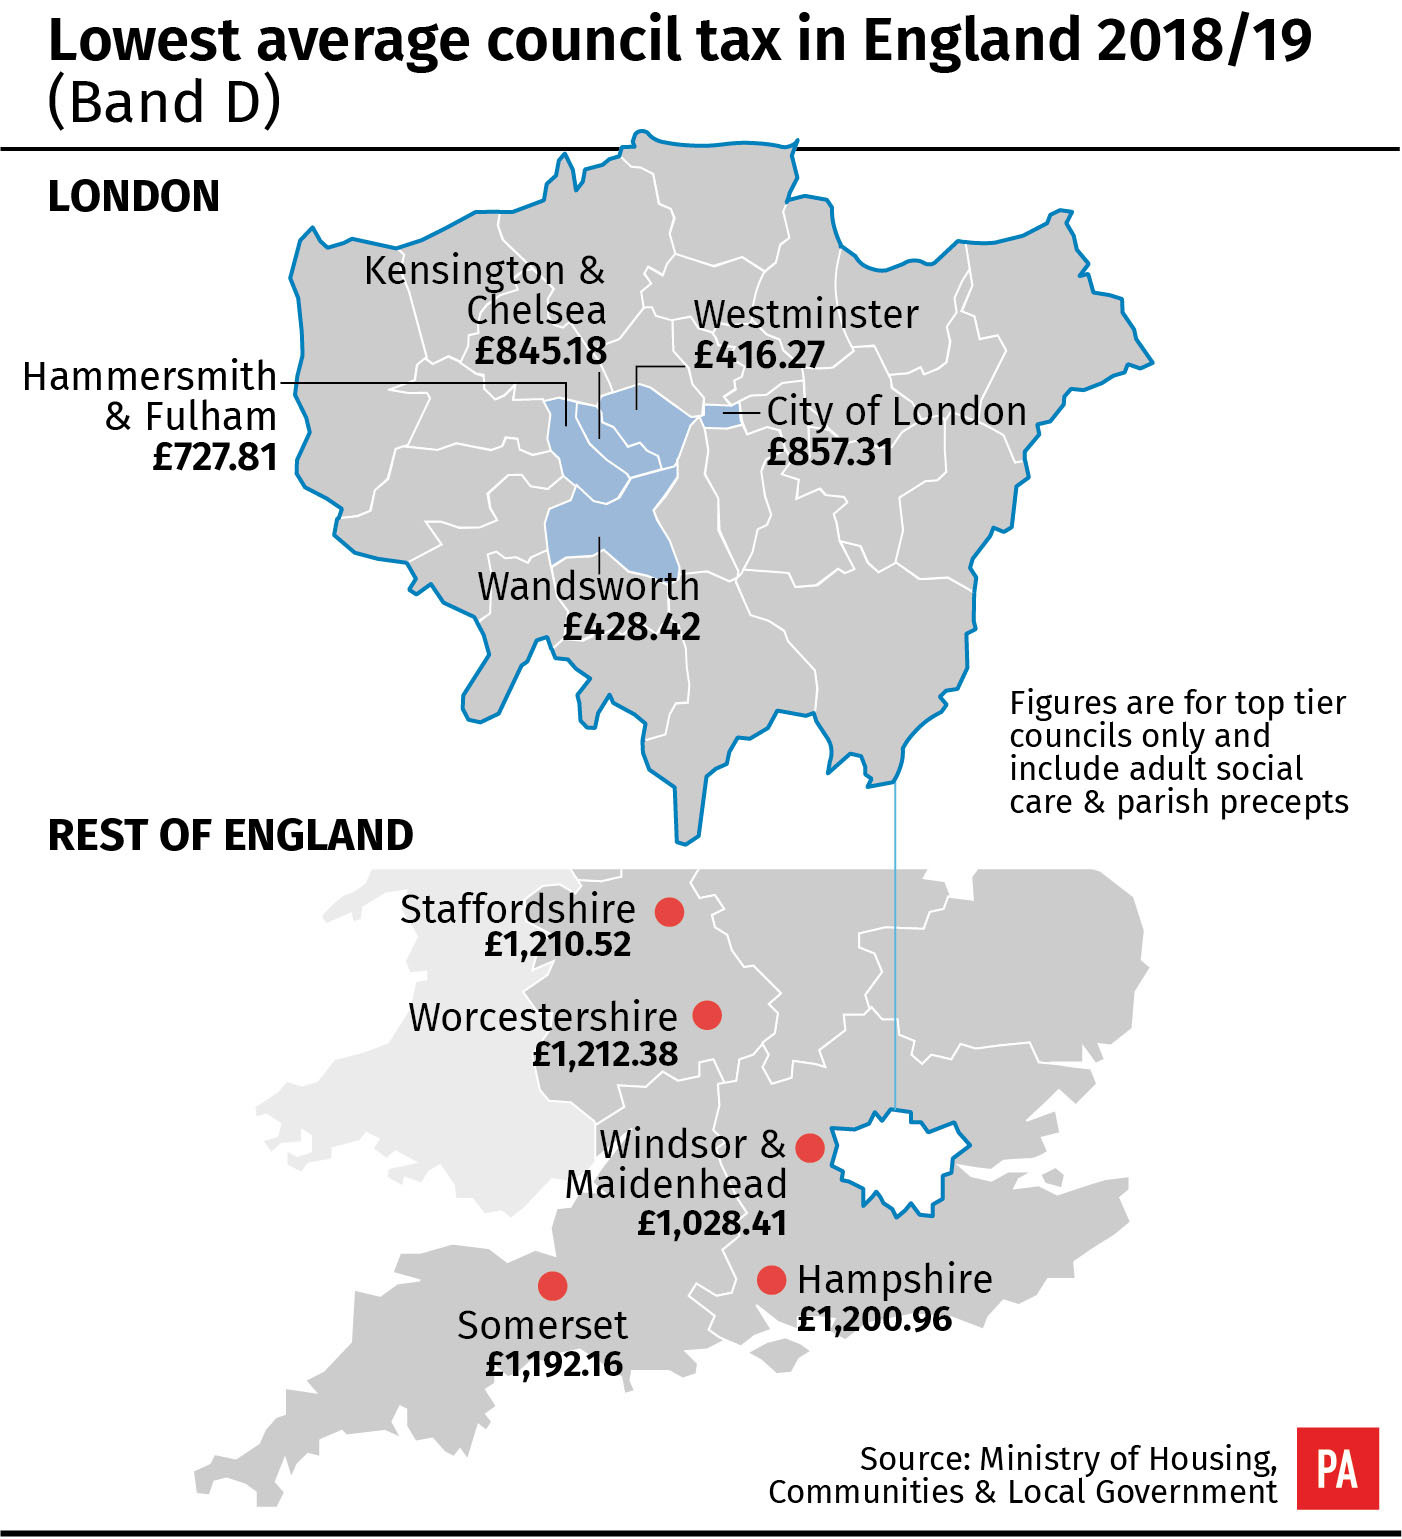 Lowest average council tax in England 2018/19 (Band D)